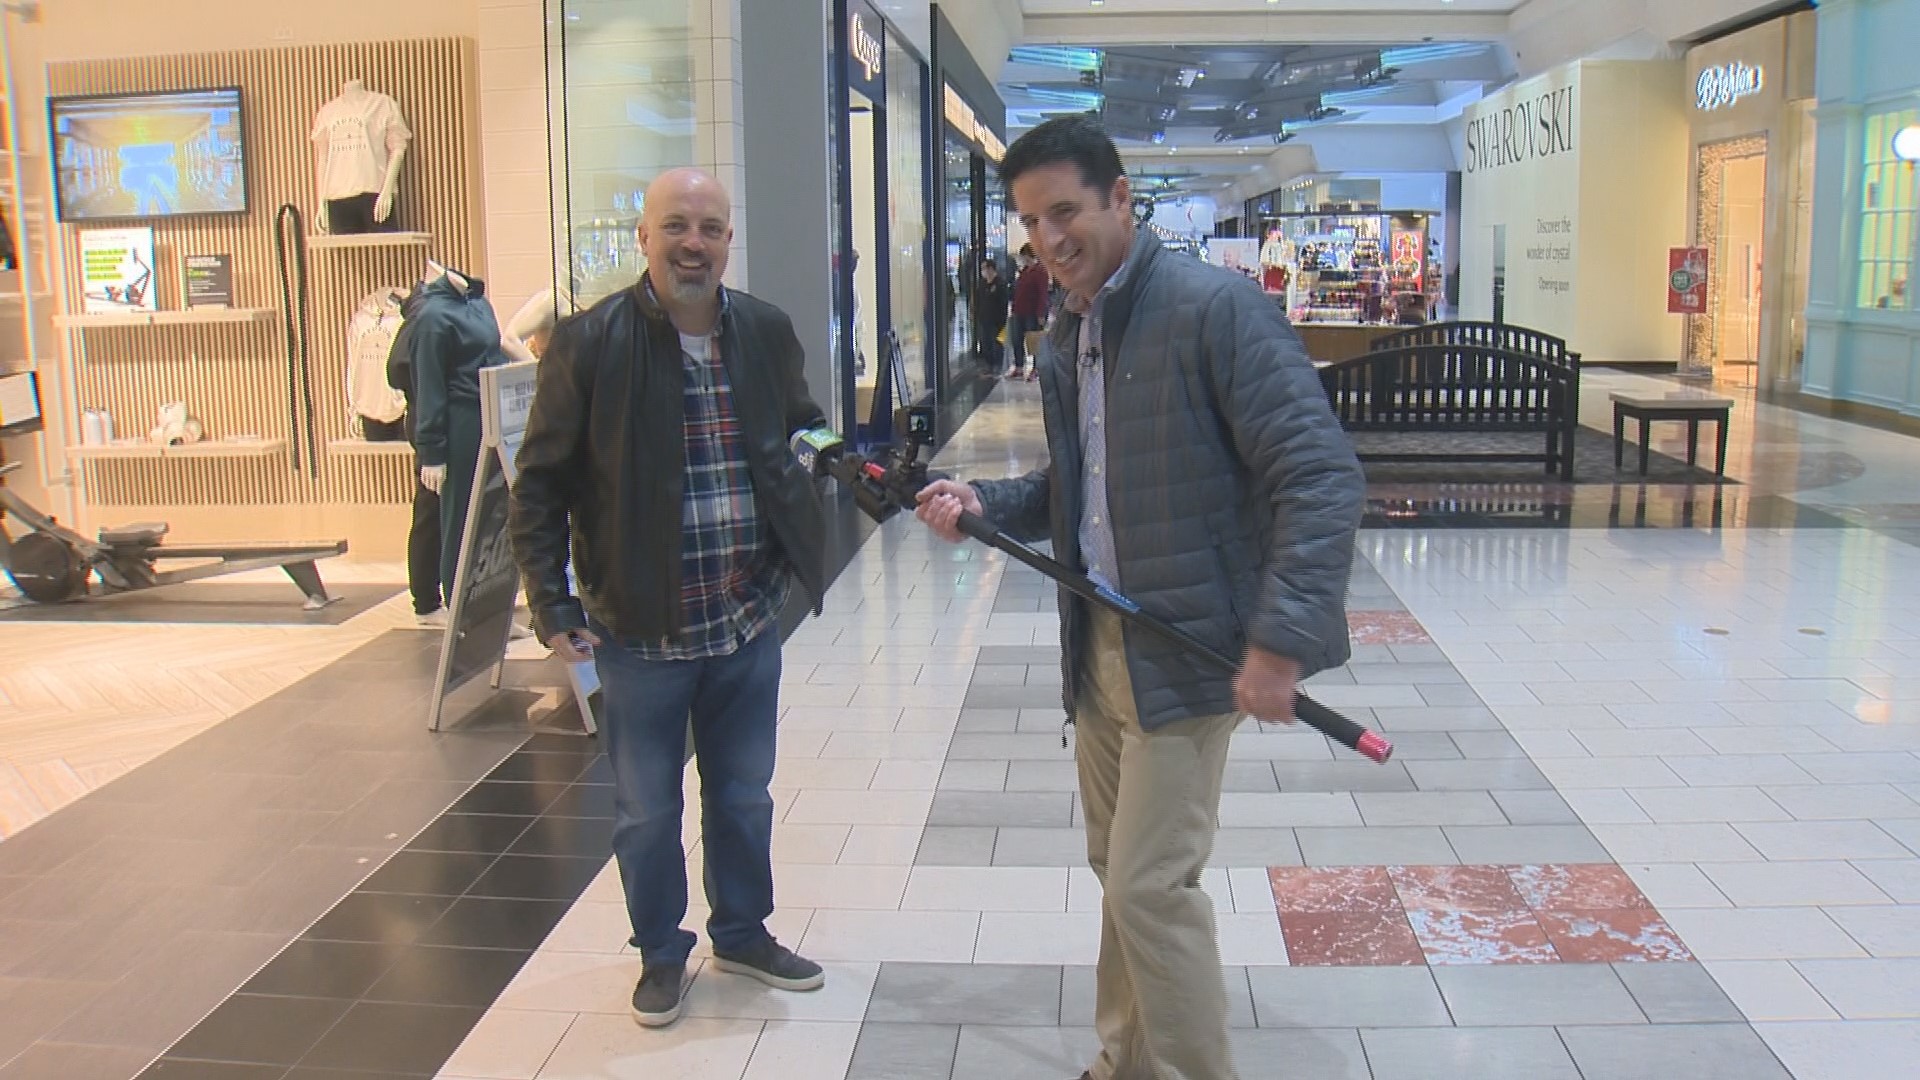 Who's the hardest person to shop for? Have you been naughty or nice this year? Drew Carney spoke with holiday shoppers at the Washington Square Mall in Tigard.